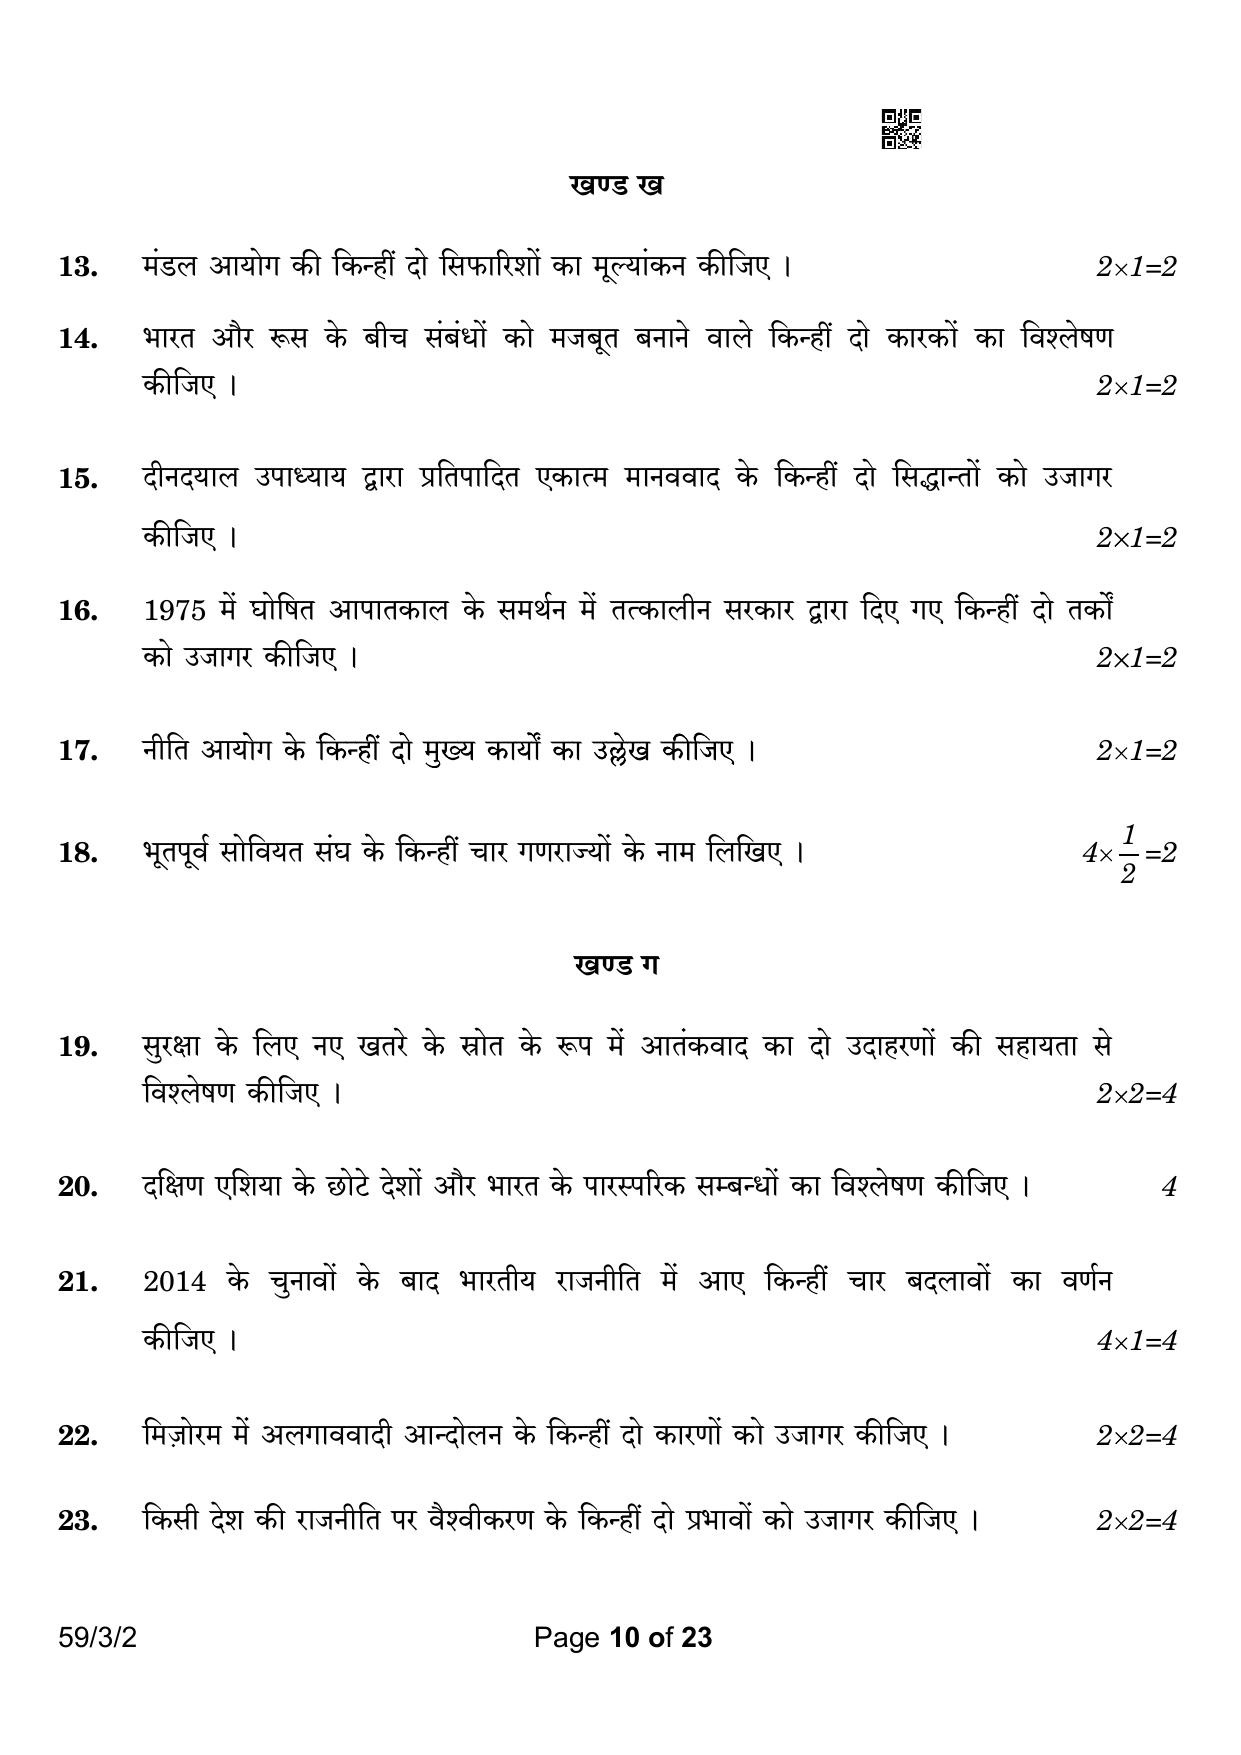 CBSE Class 12 59-3-2 Political Science 2023 Question Paper - Page 10